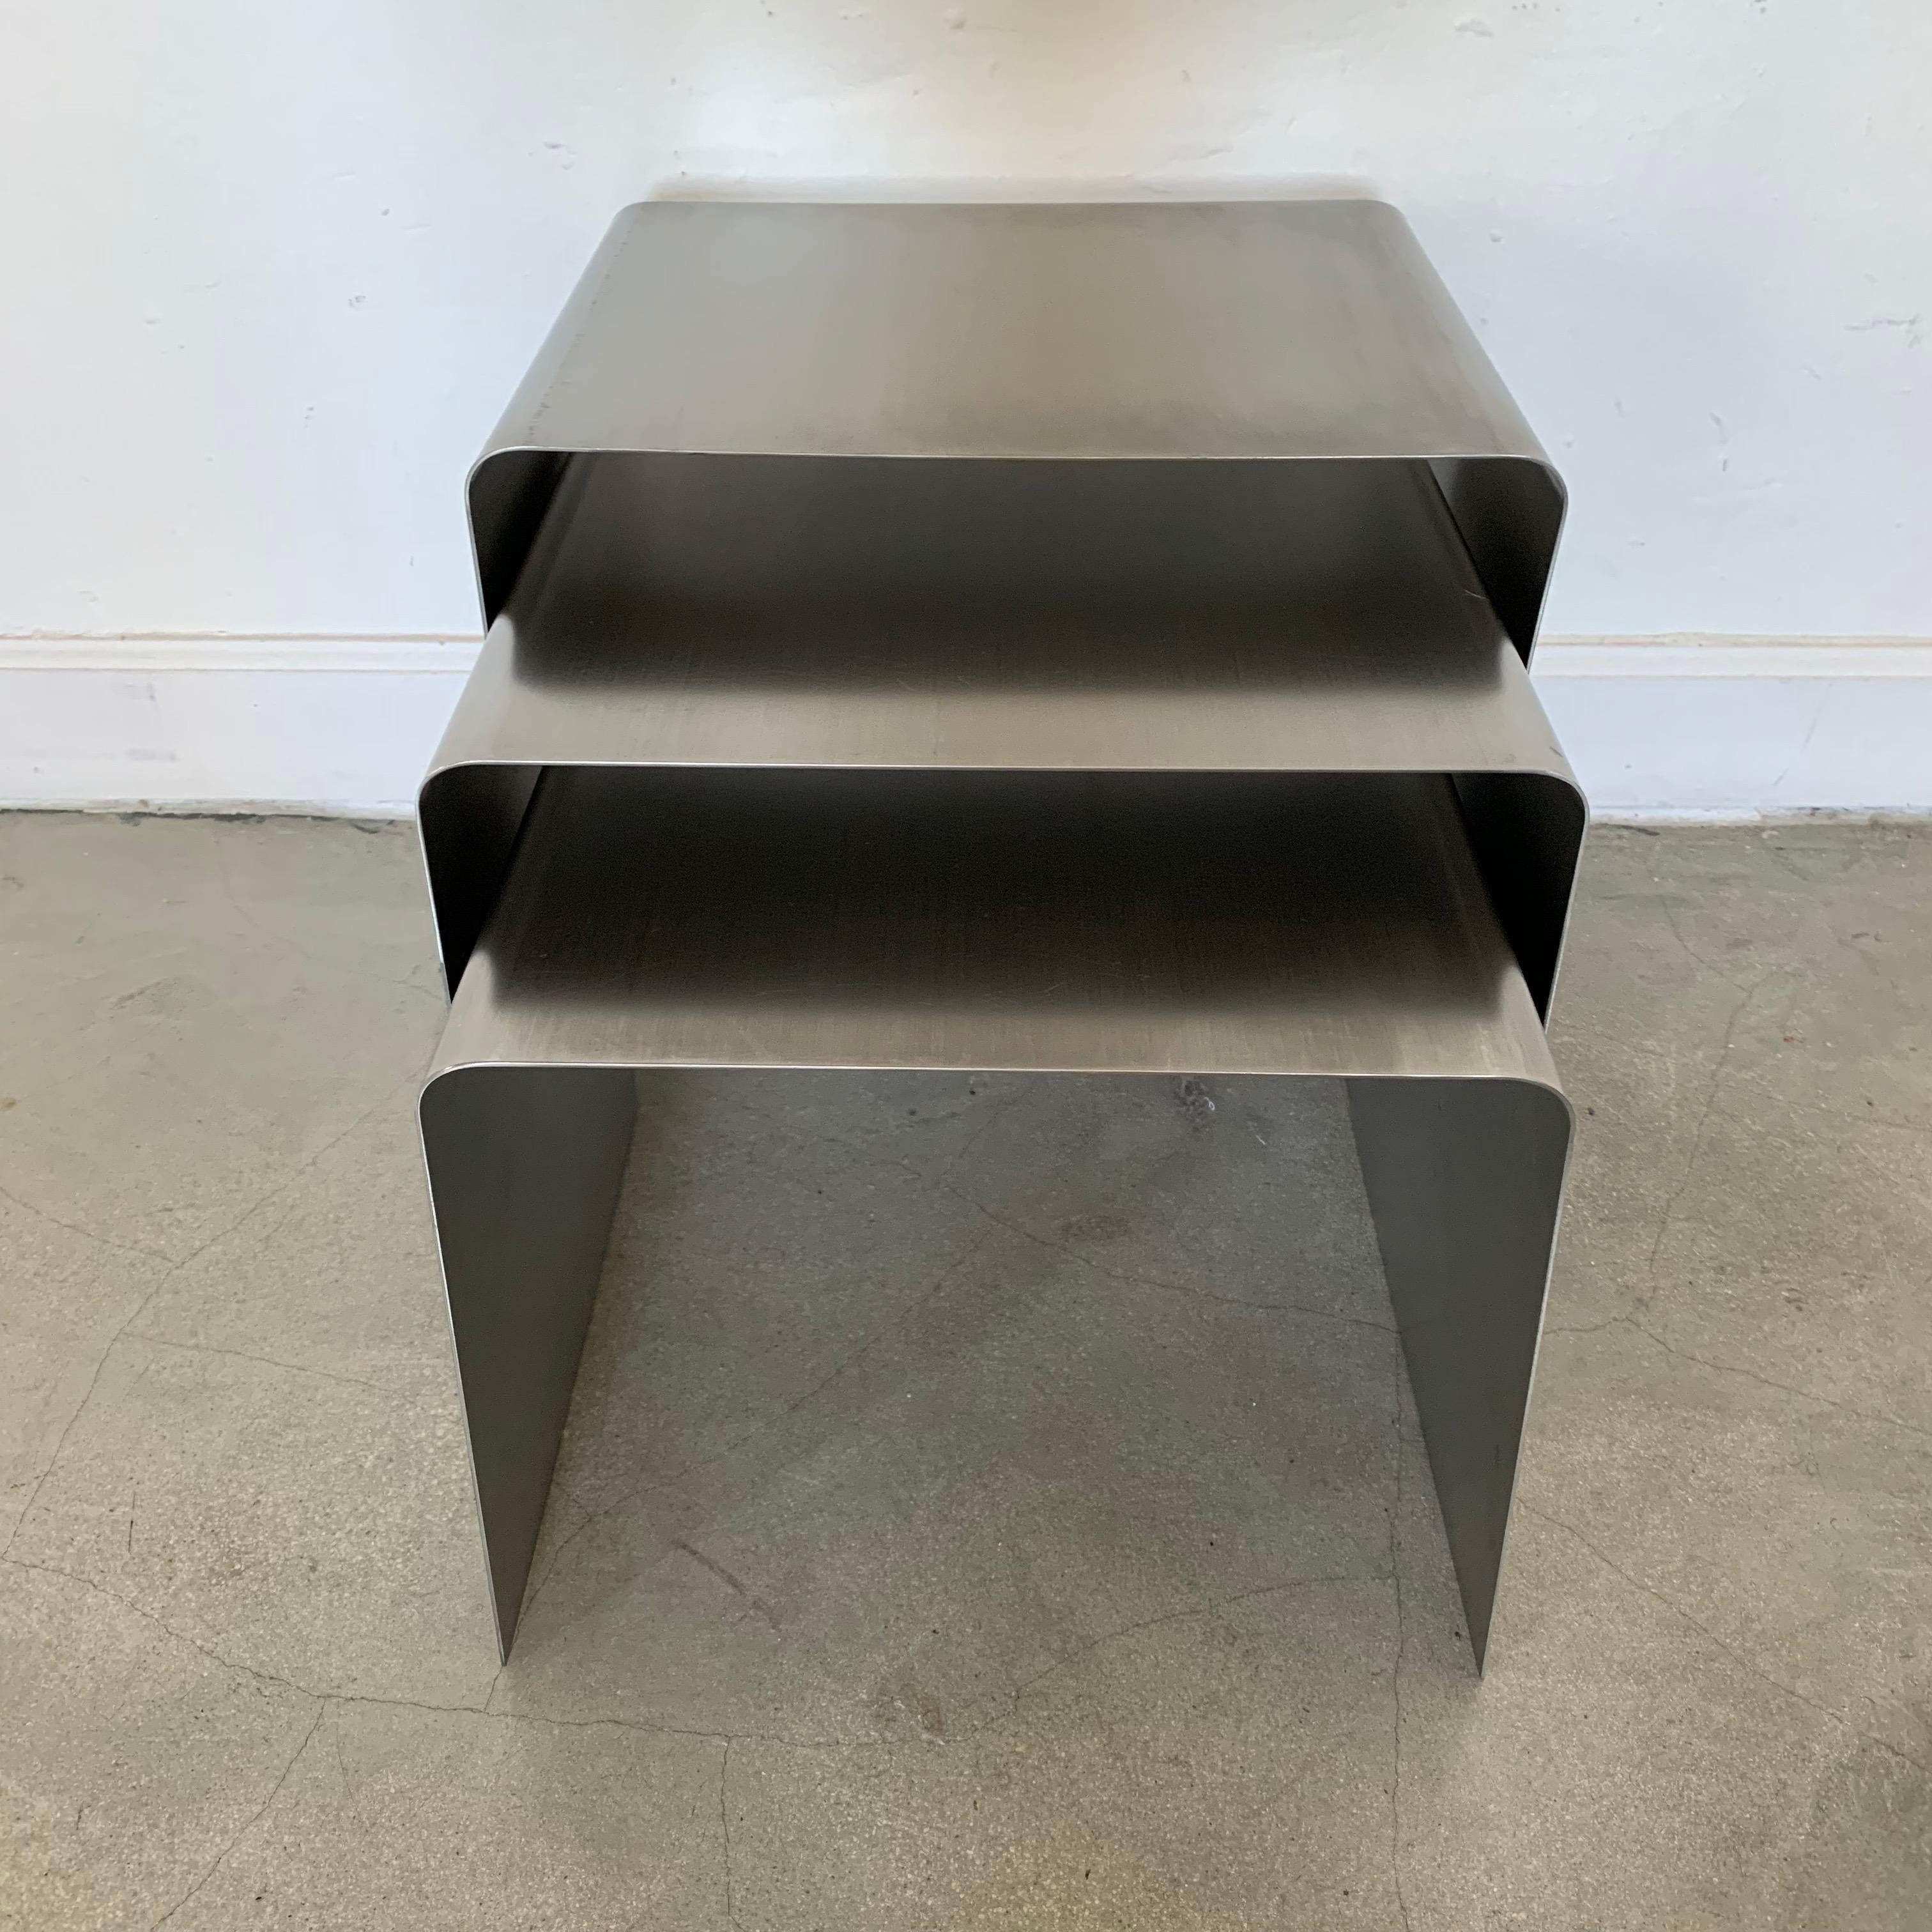 Rare set of three nesting tables rendered in bent brushed stainless steel designed by François Monnet for Kappa, France, 1970s.

Table Sizes:
Large- 13 D x 15.75 W x 15.5 H
Medium- 13 D x 15 W x 13.75 H
Small- 13 D x 13.5 W x 11.5 H.